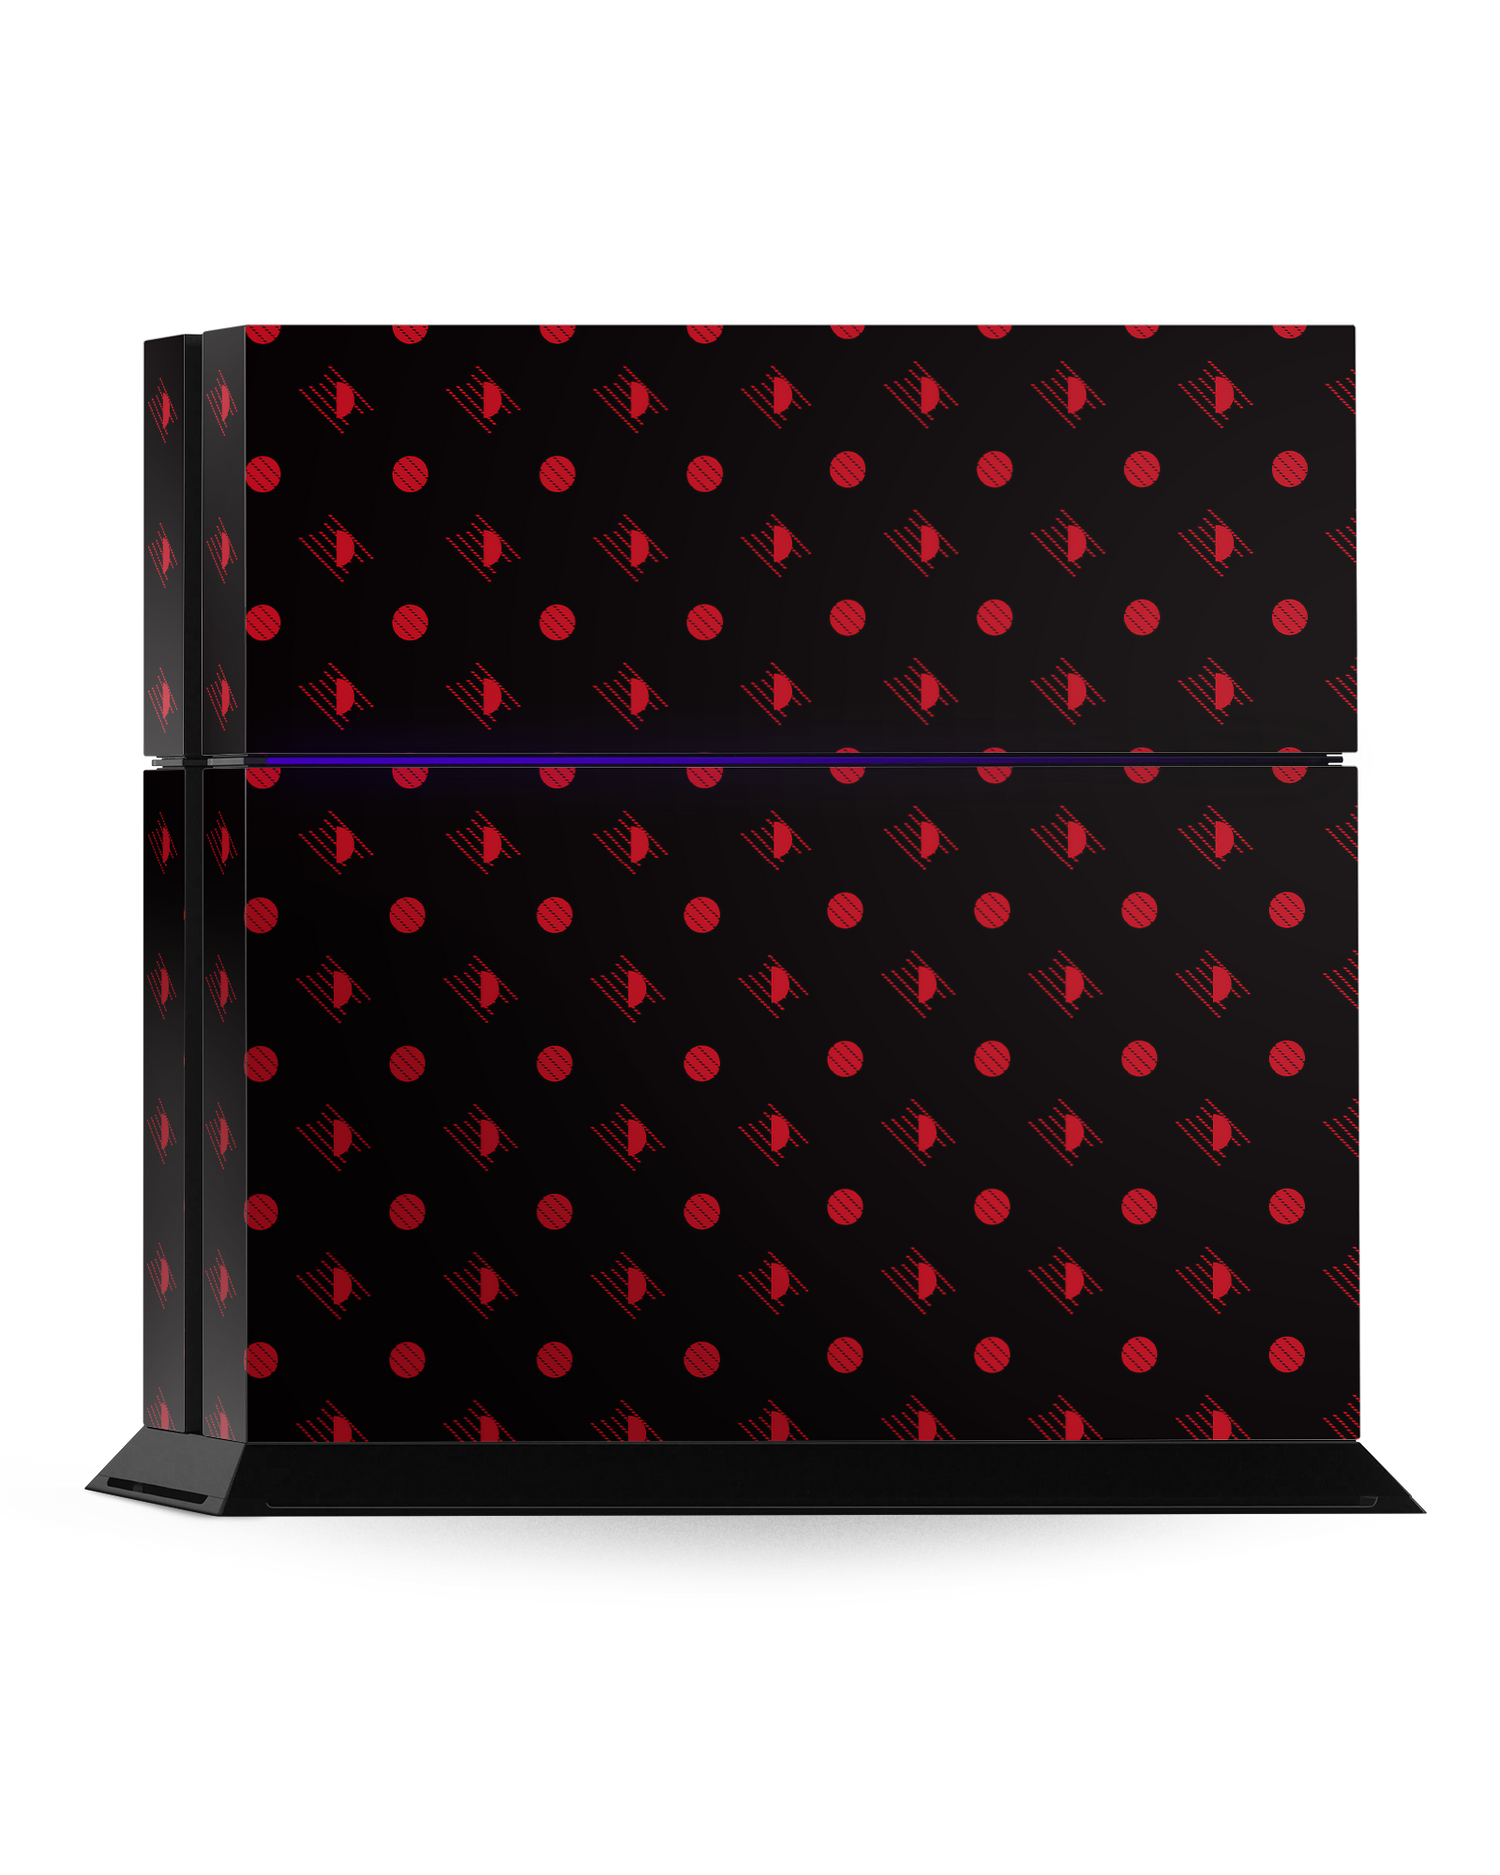 Dot Distrupt Console Skin for Sony PlayStation 4: Standing